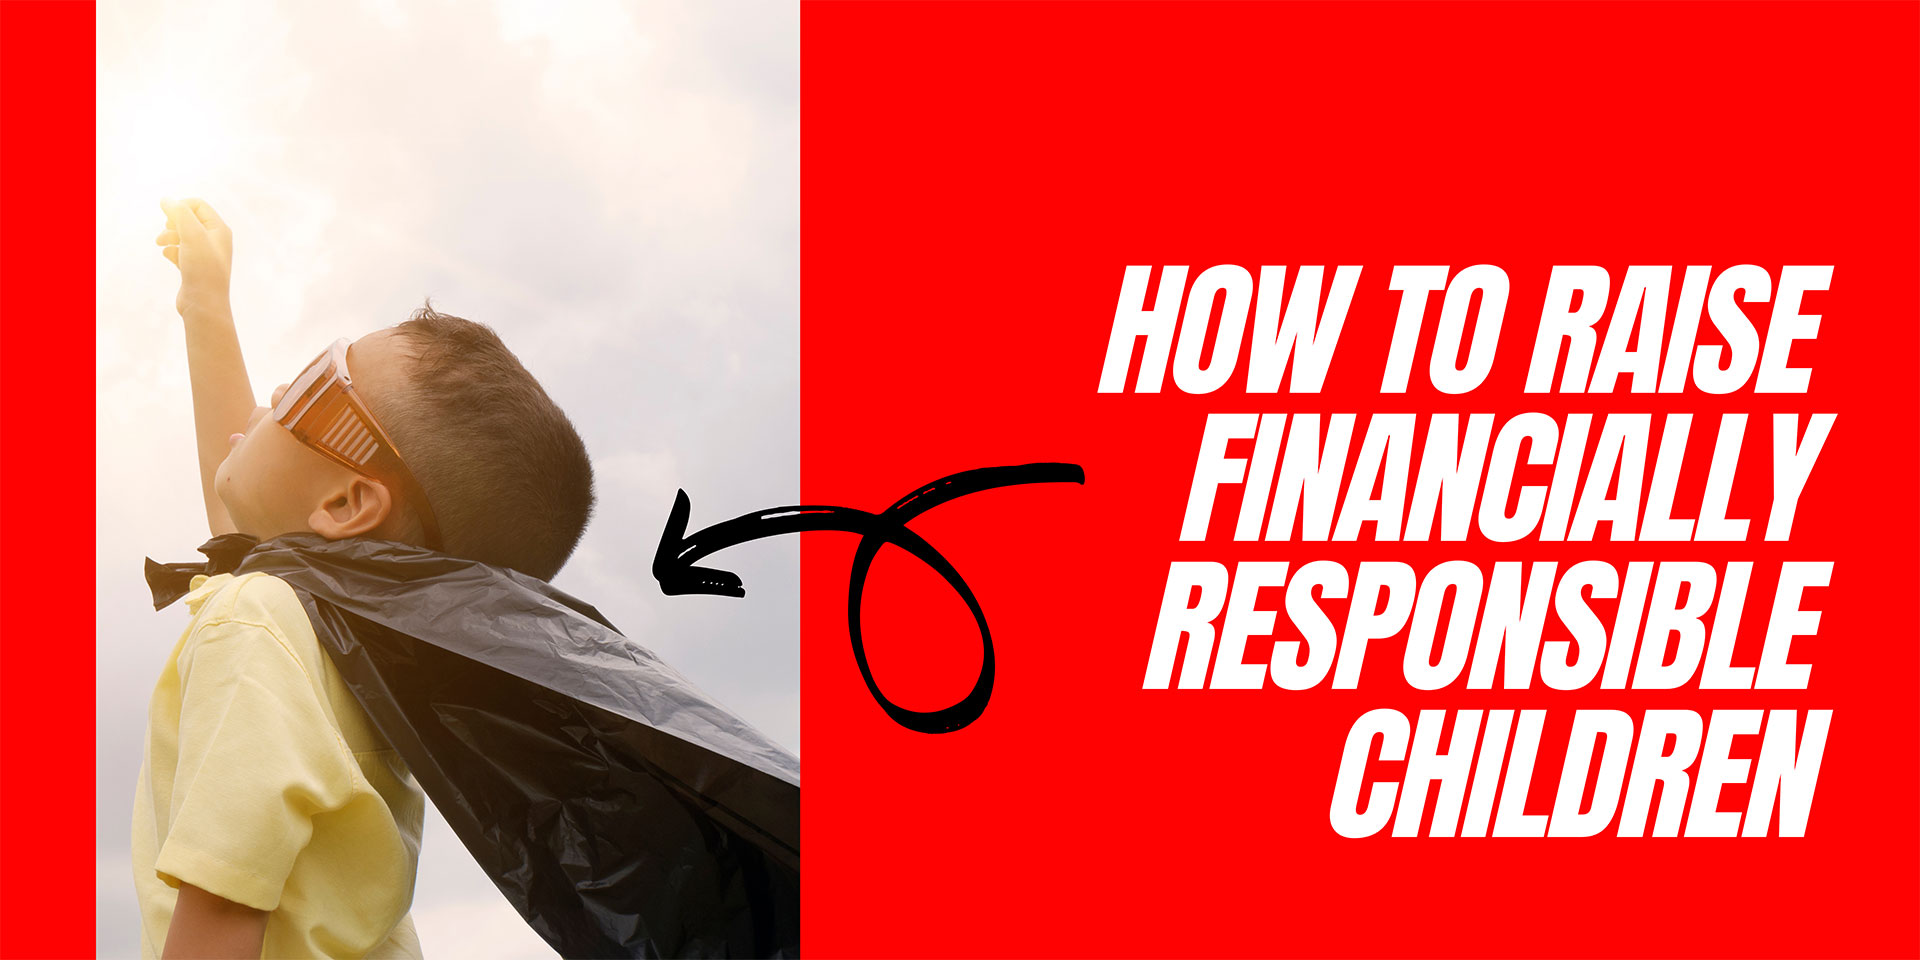 You are currently viewing How to Raise Financially Responsible Children: 8 Examples.